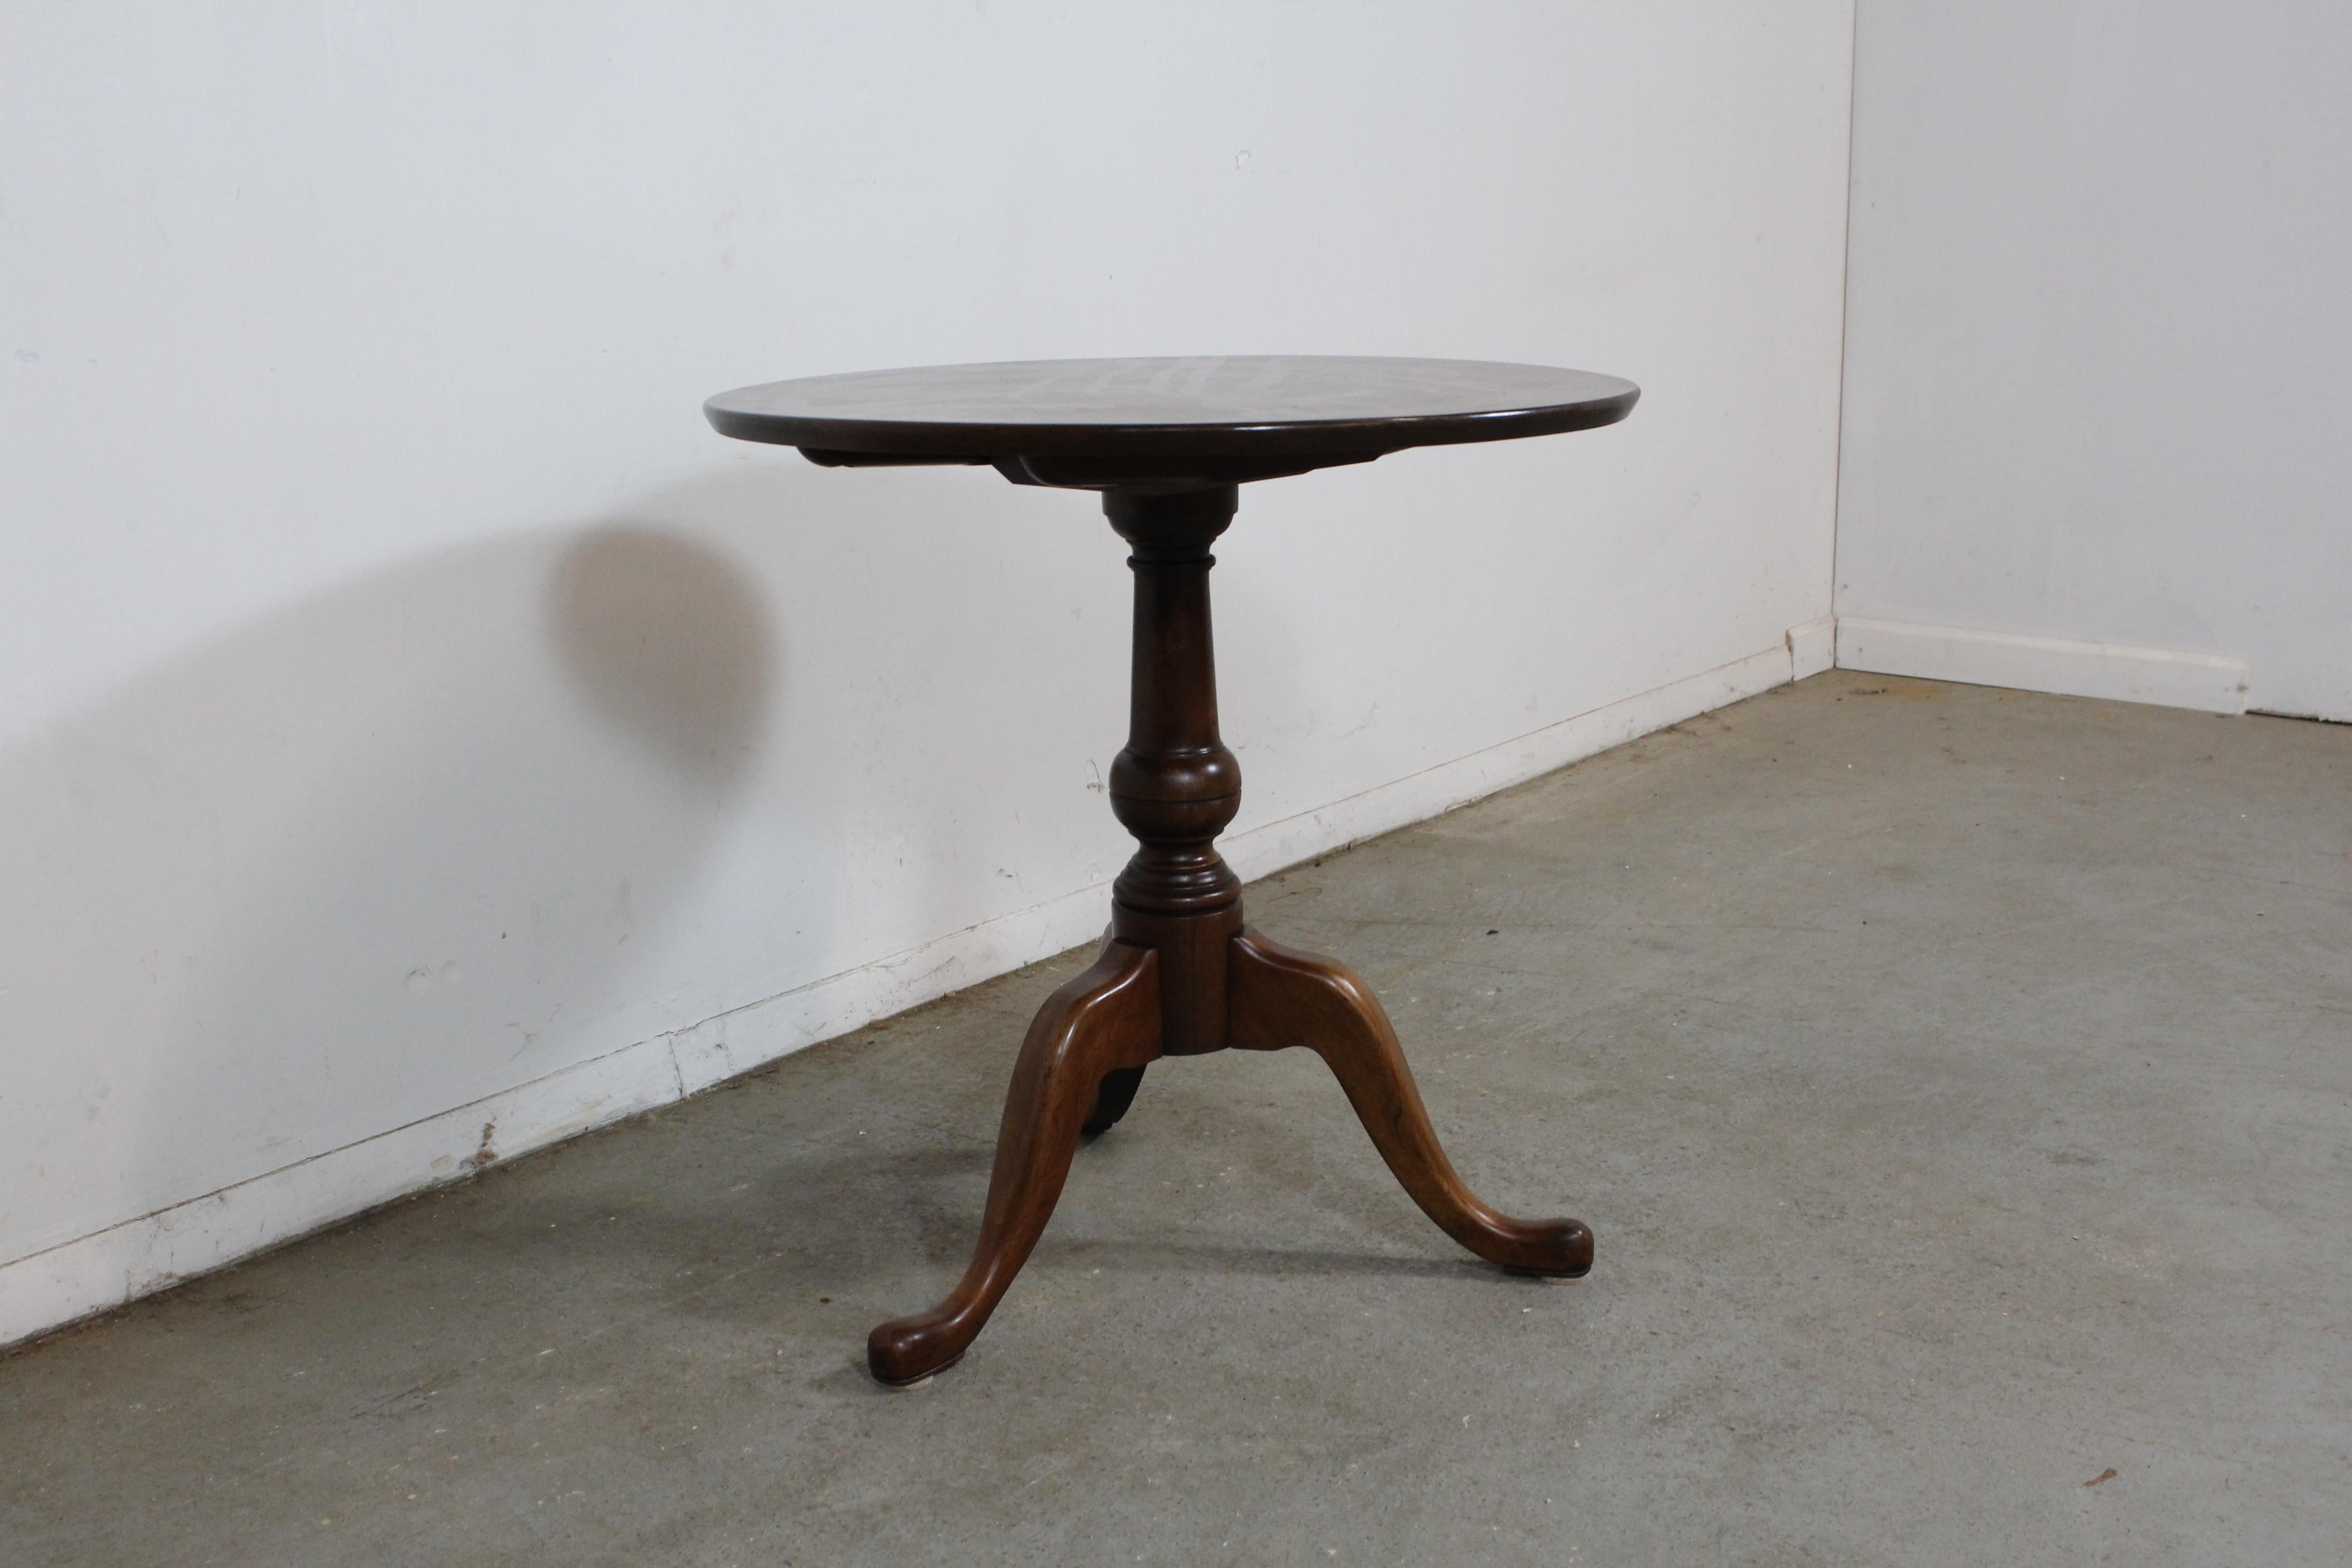 Pennsylvania House Cherry Queen Anne tilt-top table

What a find. Offered is a Pennsylvania House Cherry Queen Anne tilt-top table. This table has some minor scratches and age wear. It is a newer edition of Pennsylvania House. It is unsigned and